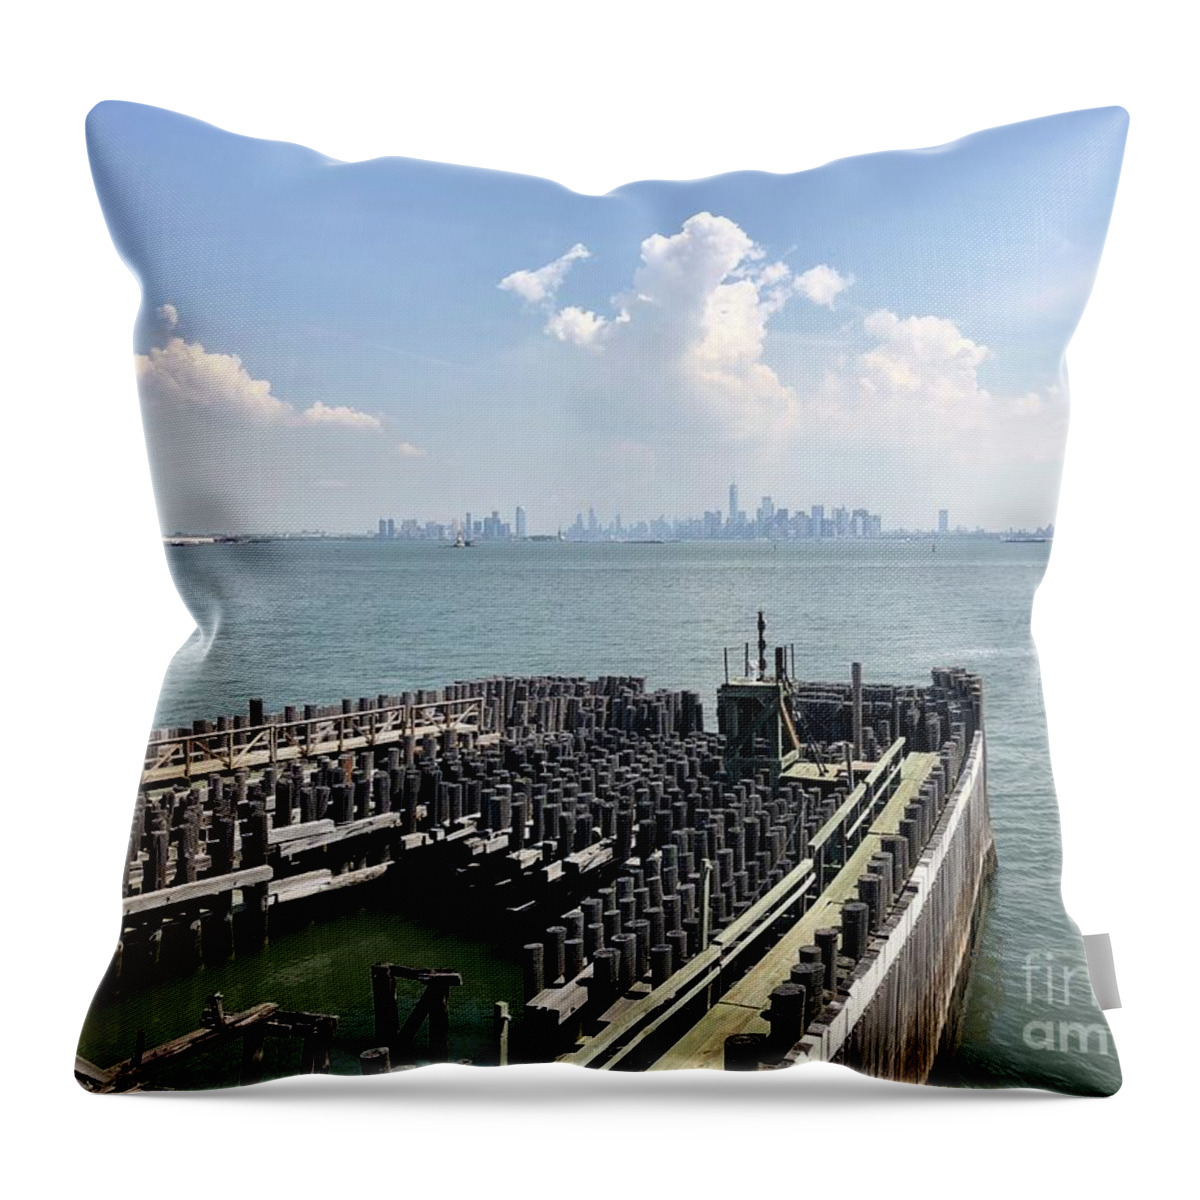 Staten Island Throw Pillow featuring the photograph Staten Island by Flavia Westerwelle